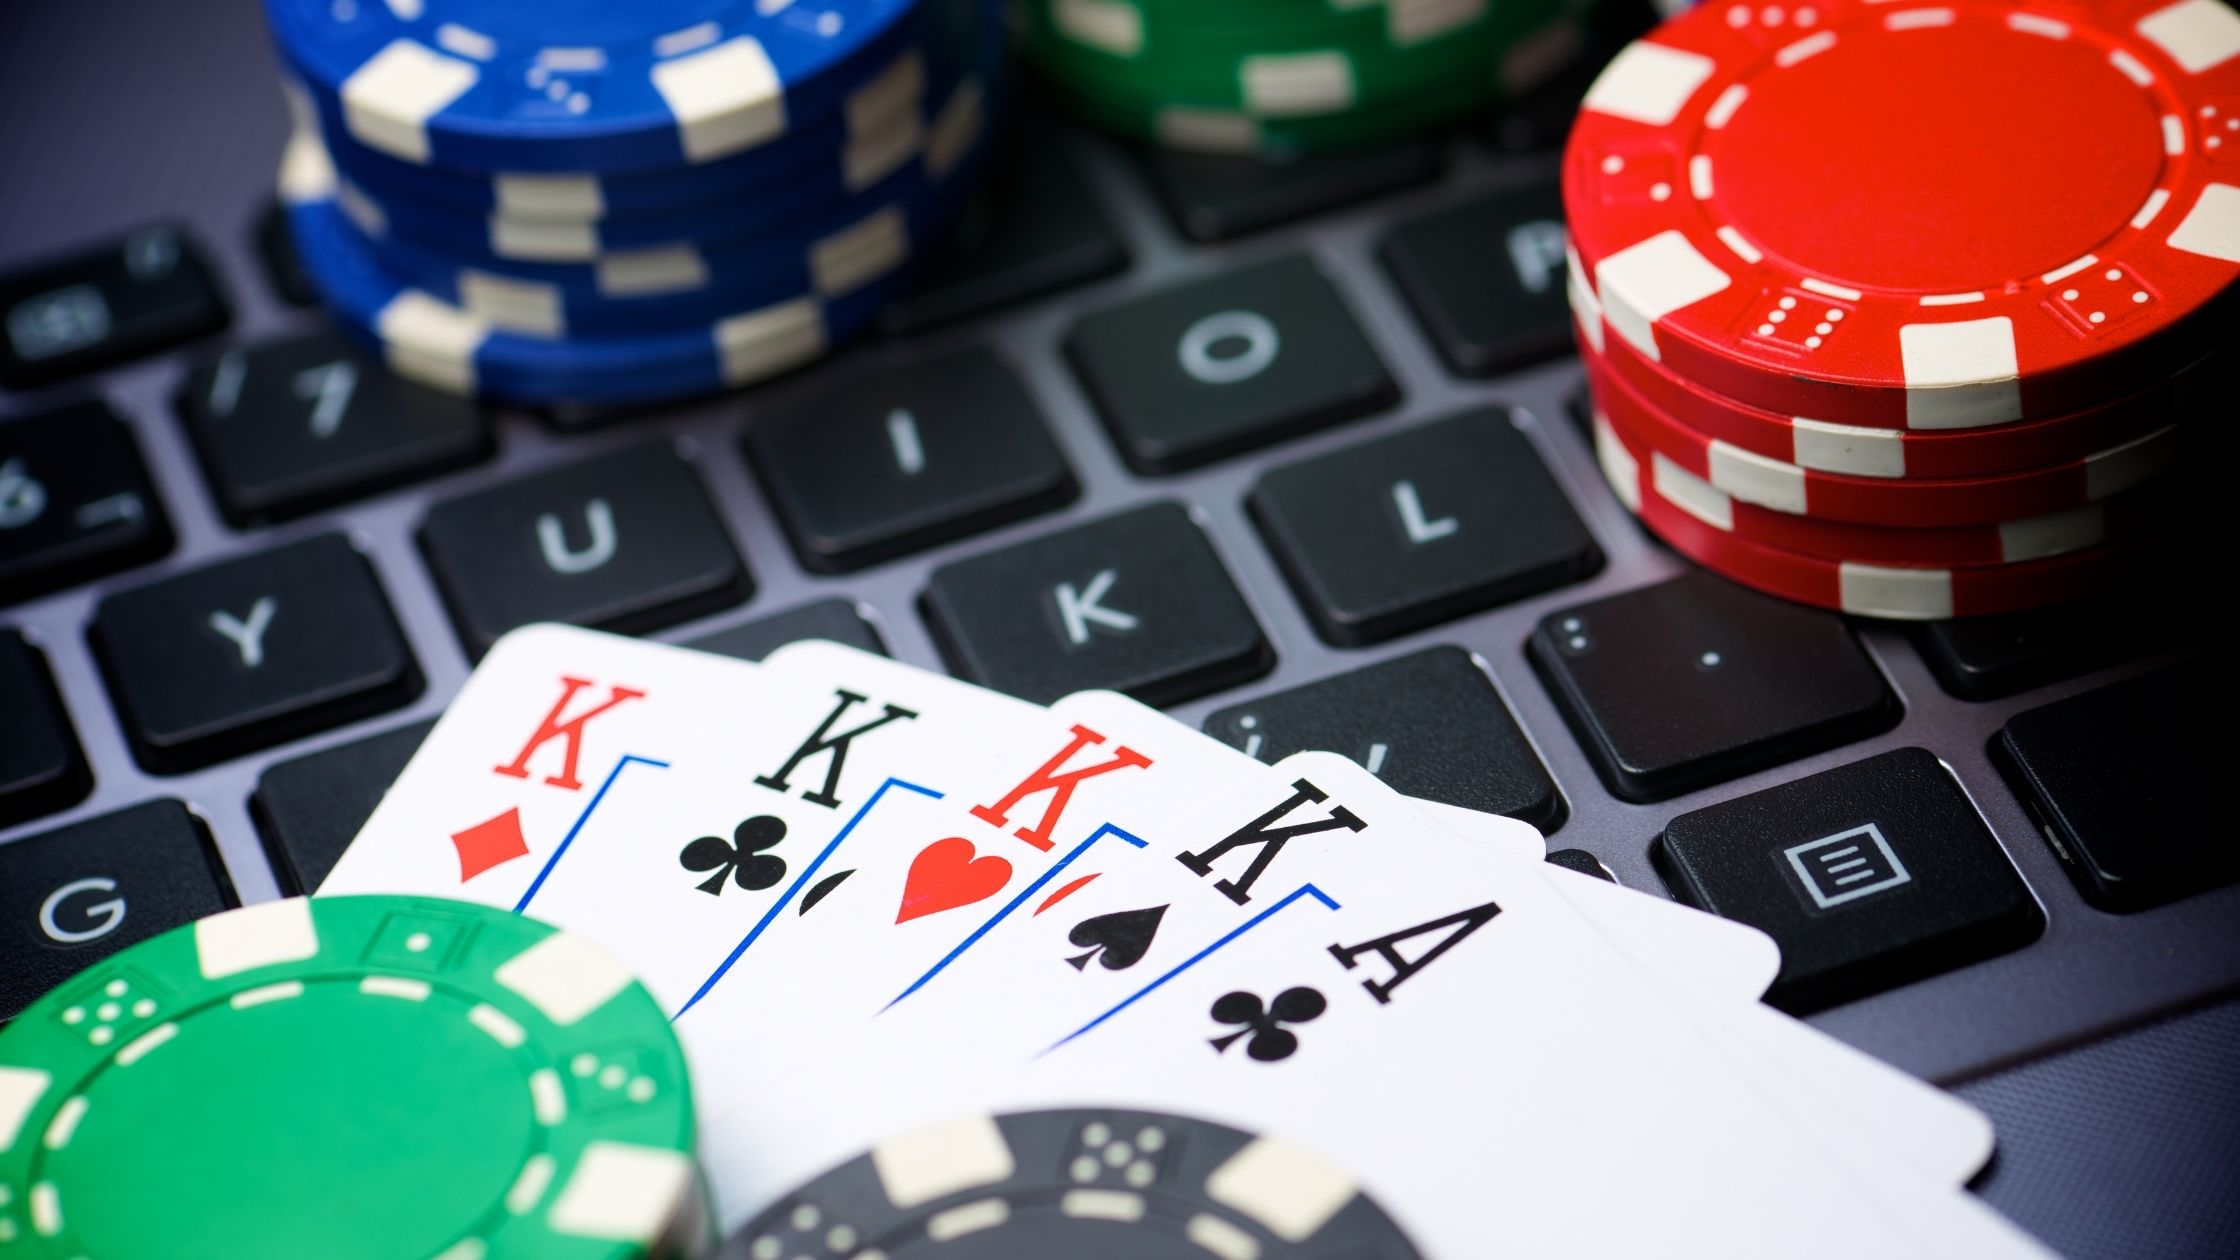 Live dealer games attracting more players to online casinos. (Photo internet reproduction)